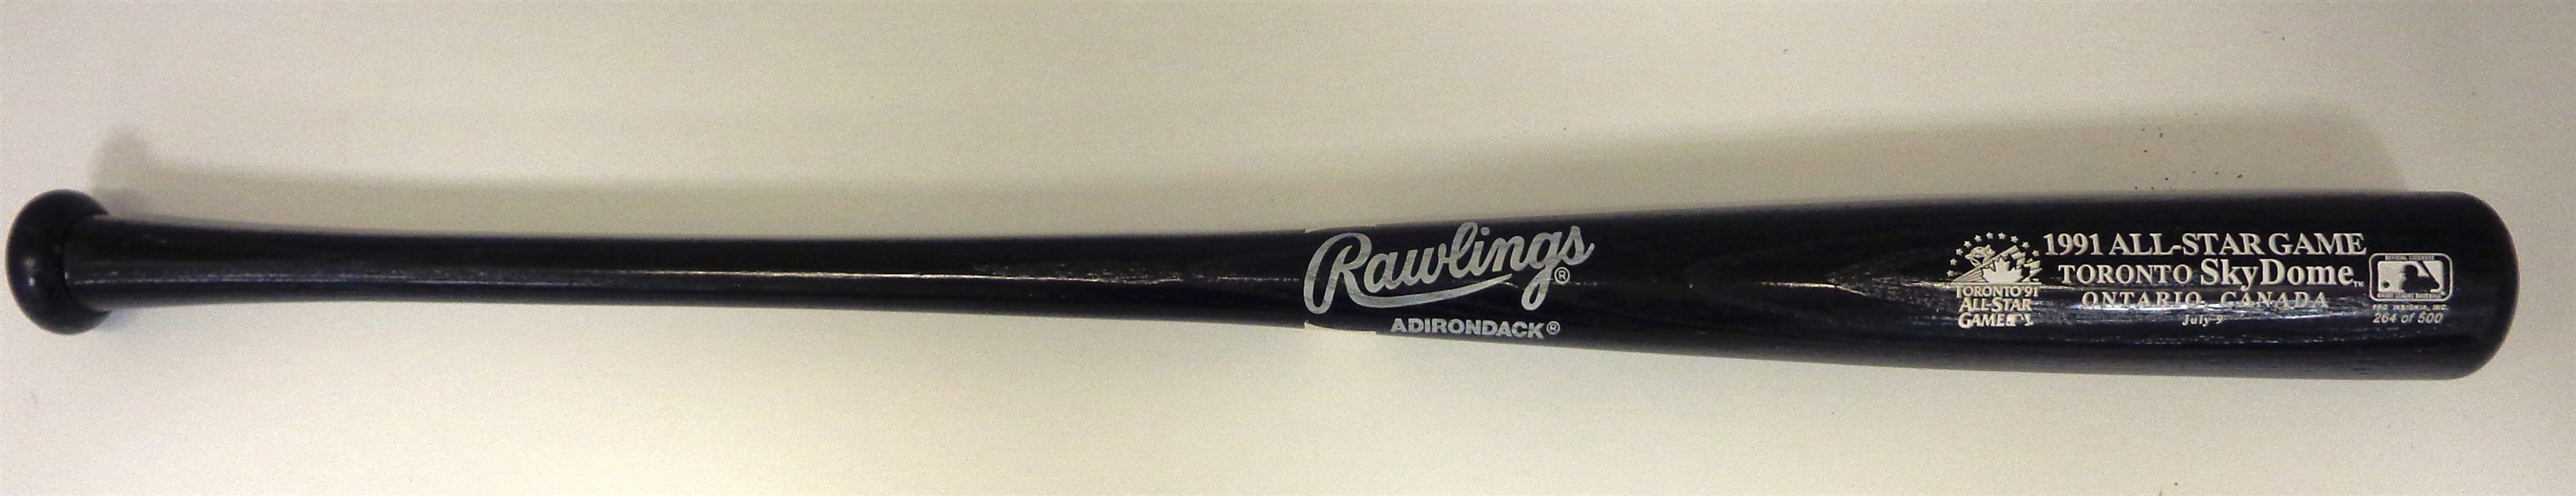 1991 All Star Game Limited Edition Bat